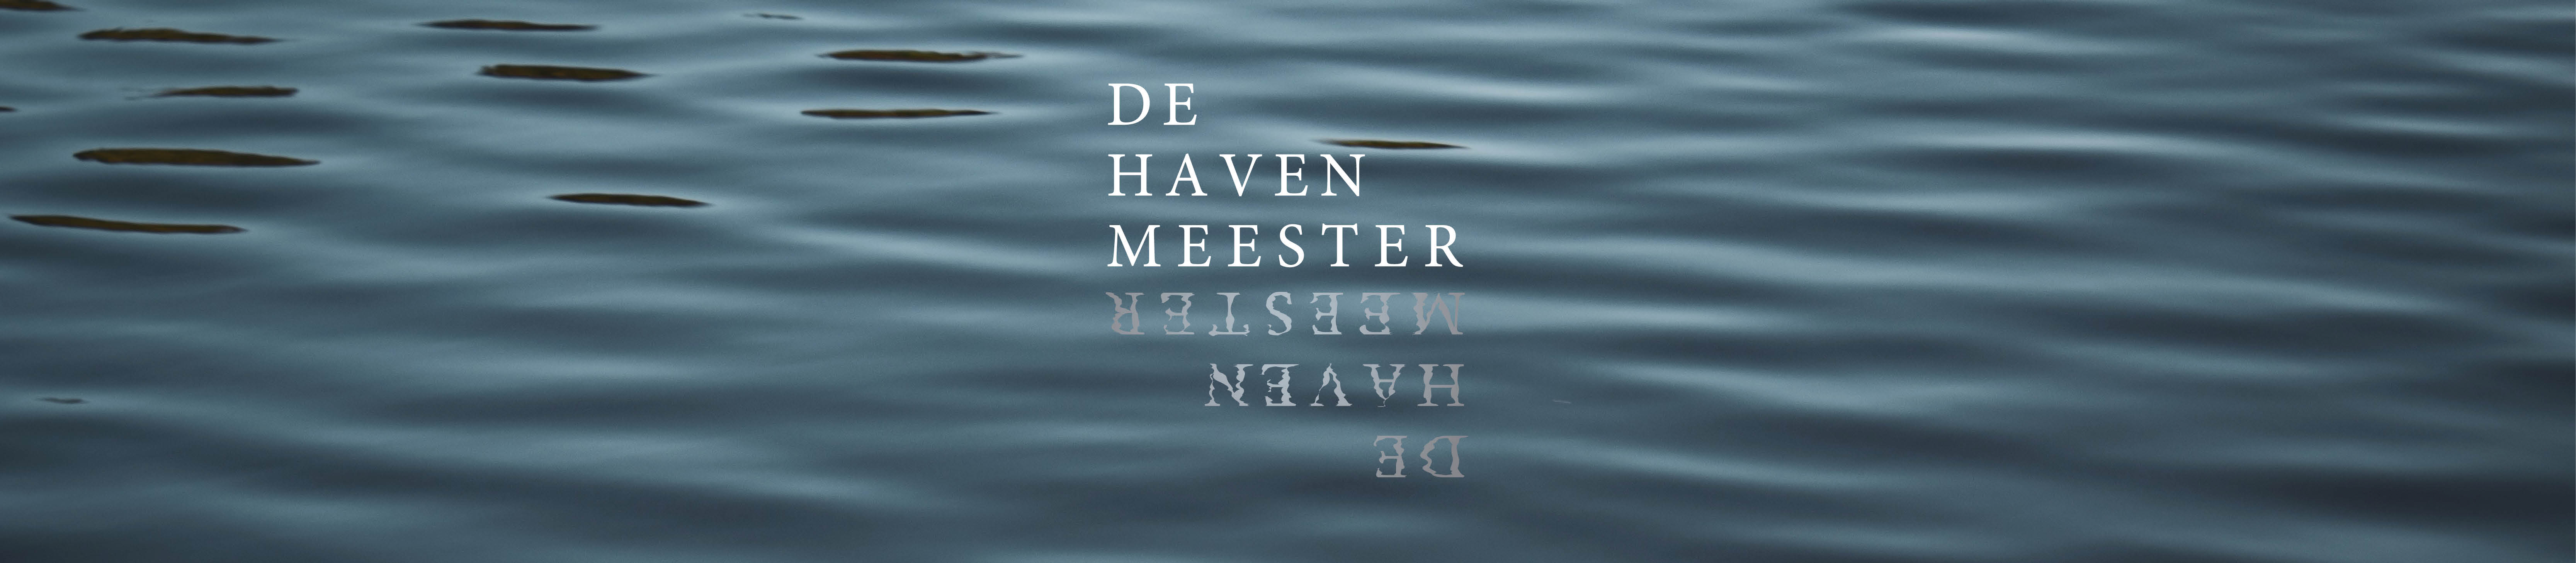 Havenmeester/